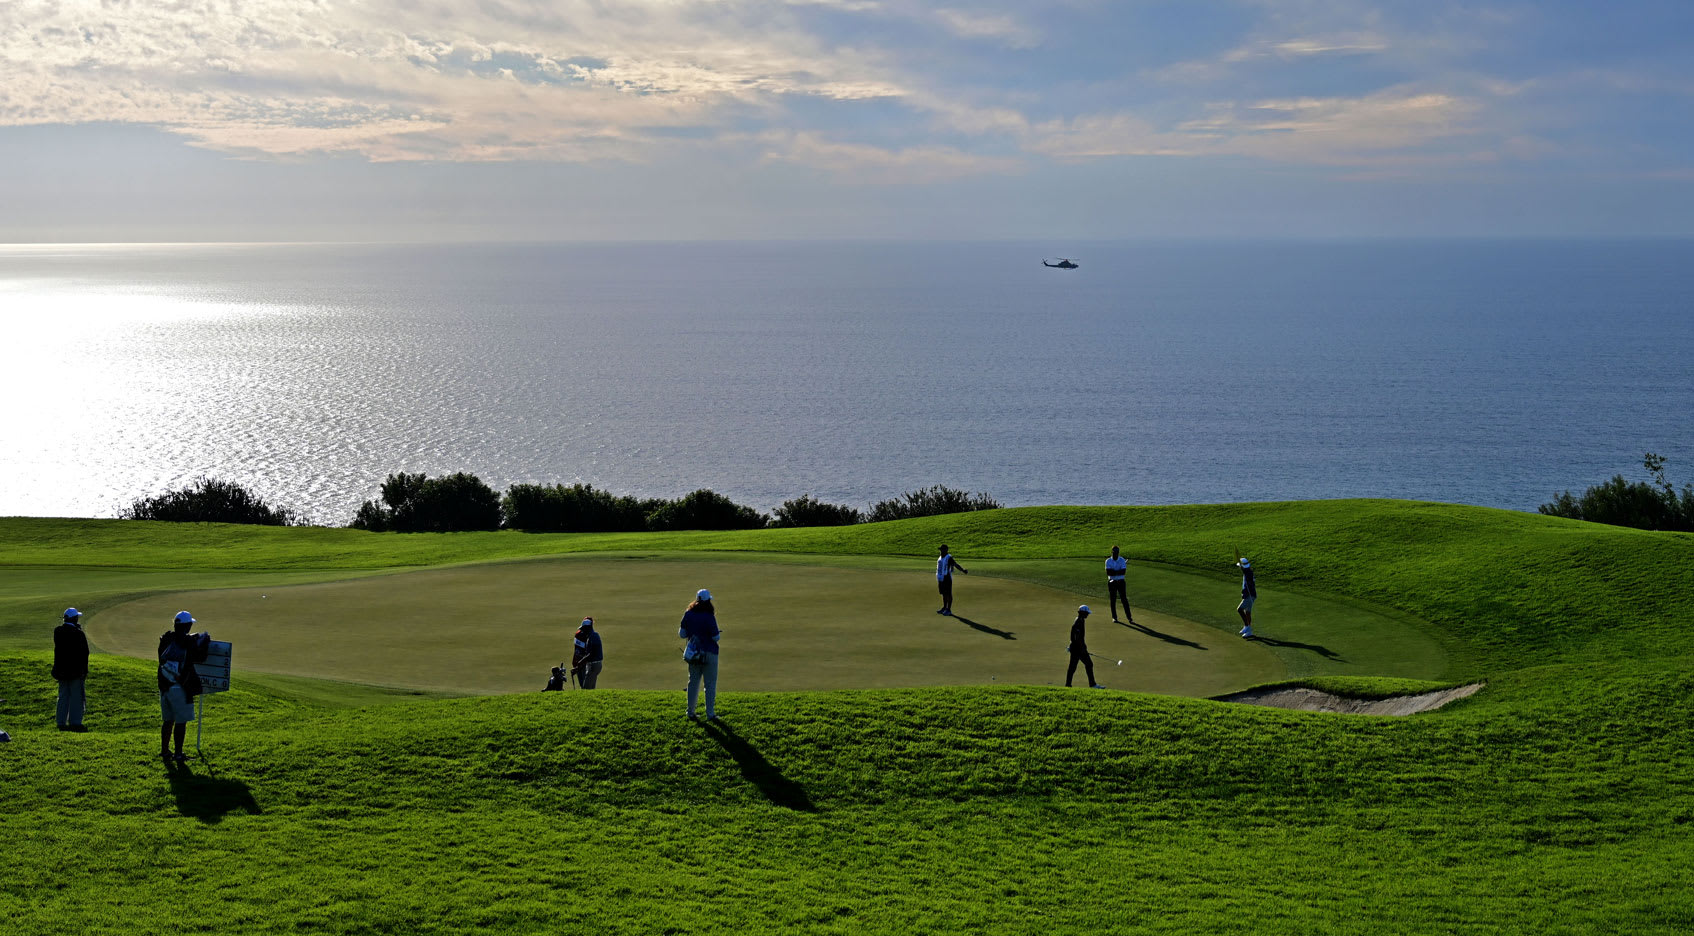 How to watch Farmers Insurance Open, Round 3 Featured Groups, live scores, tee times, TV times